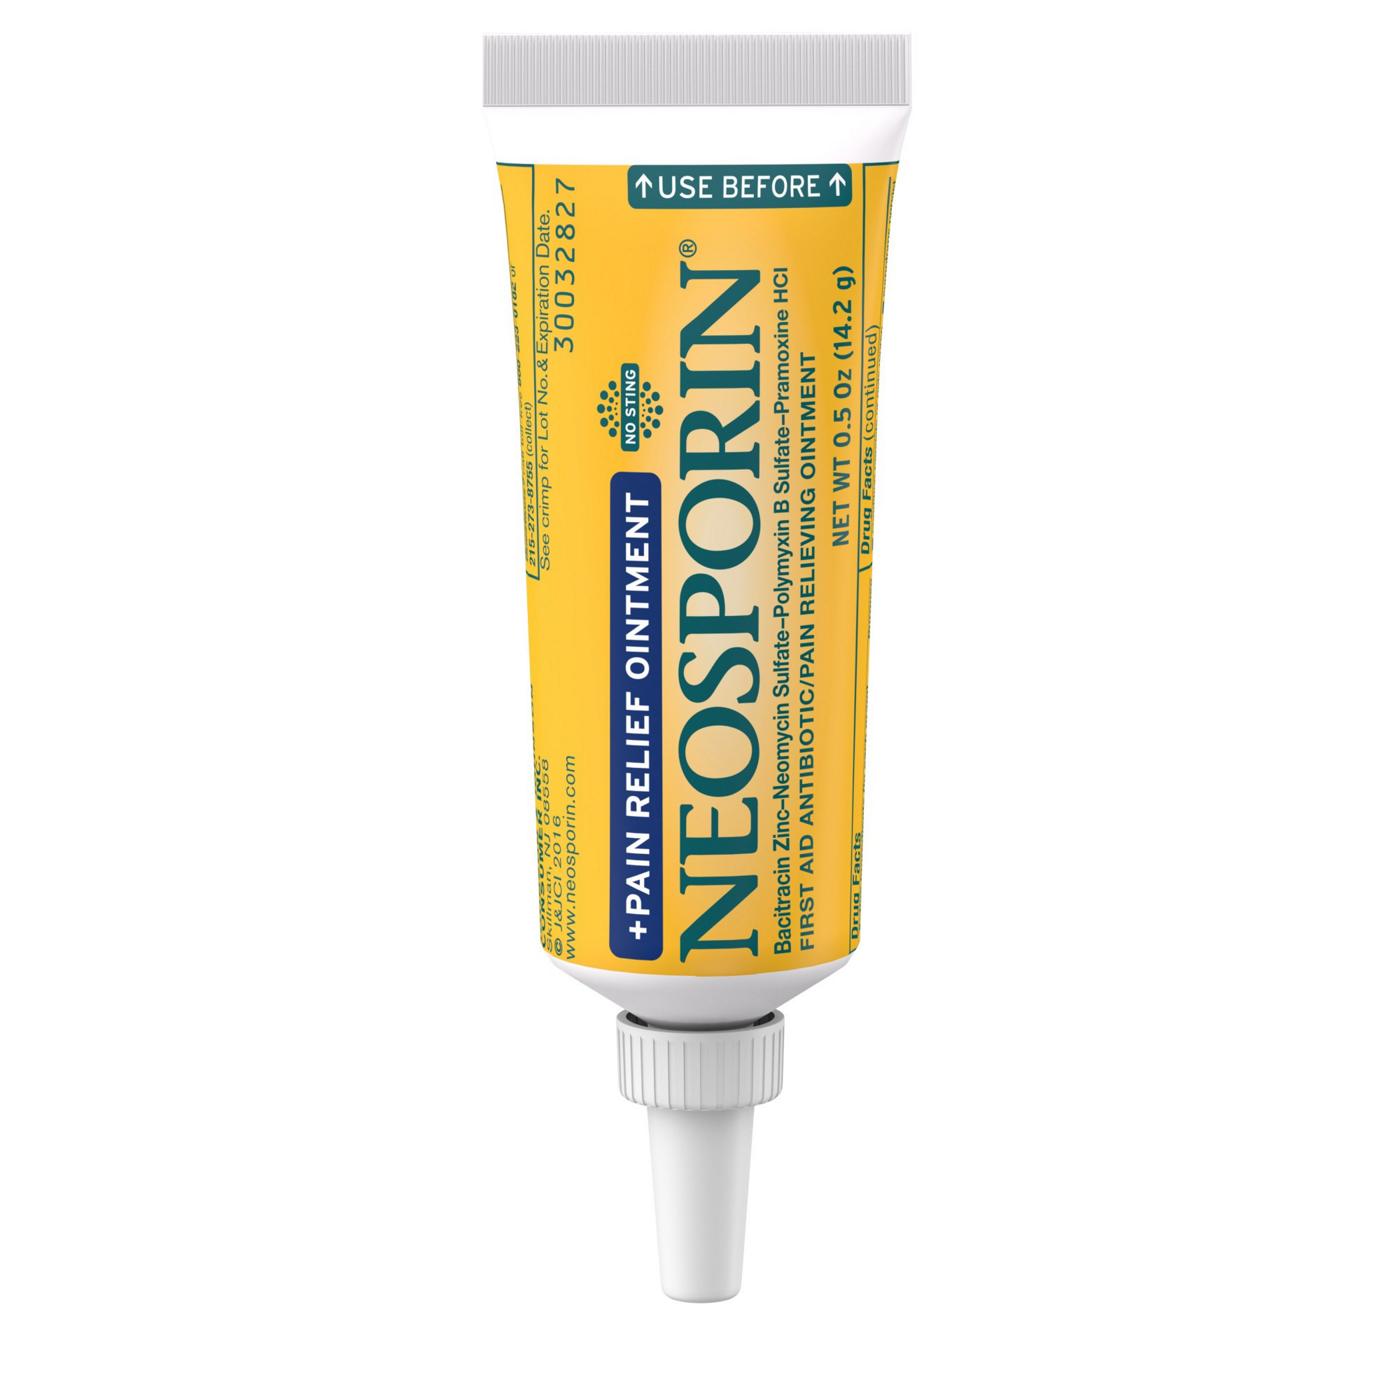 Neosporin + Pain Relief Ointment; image 2 of 7